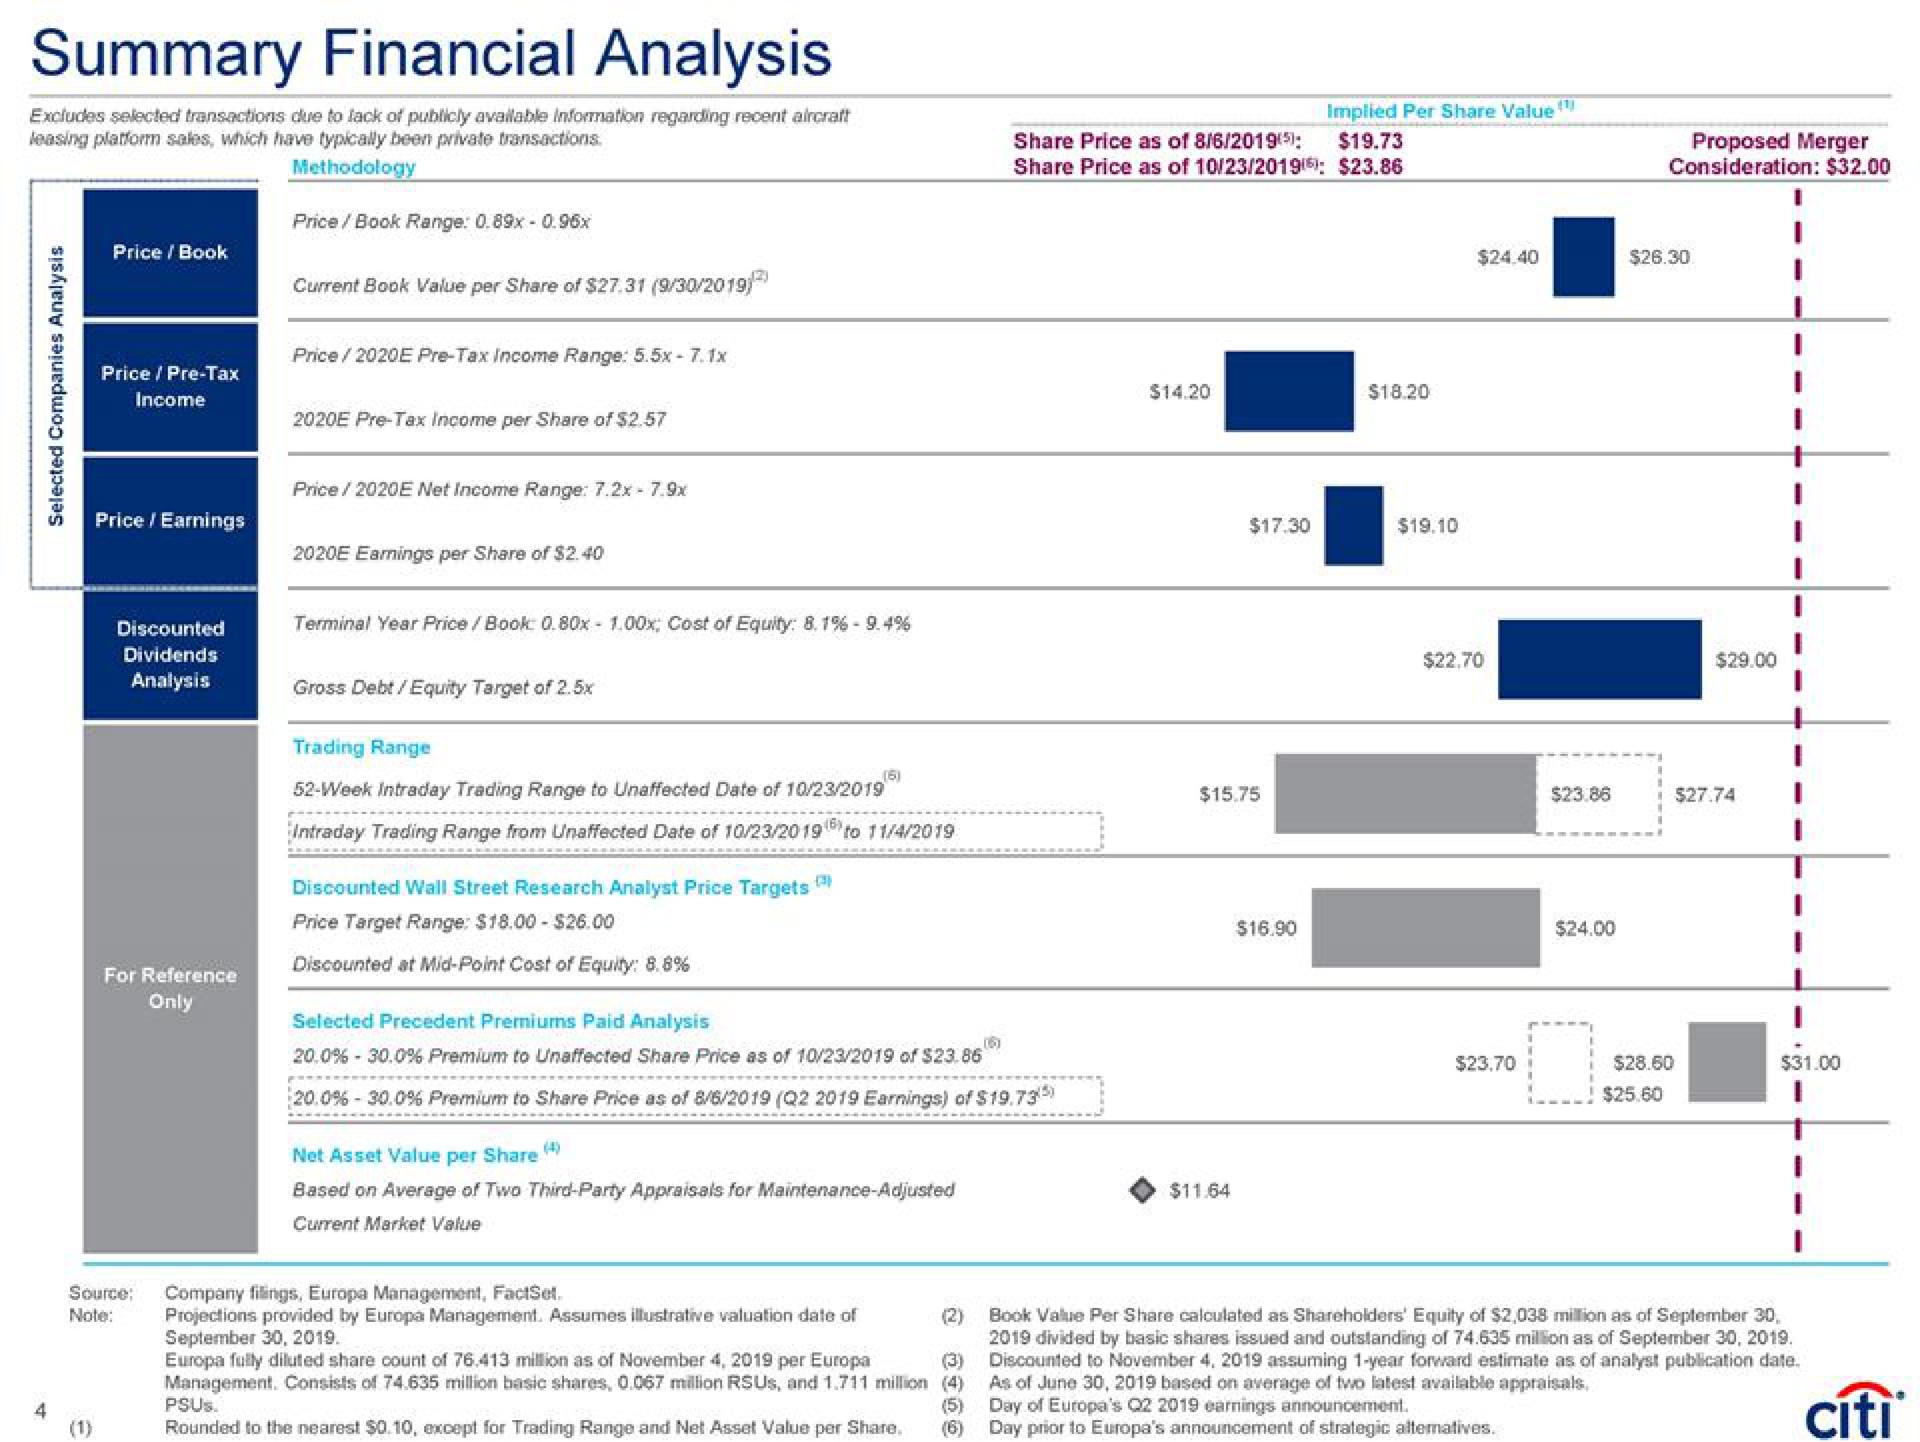 summary financial analysis a premium to unaffected share price as of of | Citi